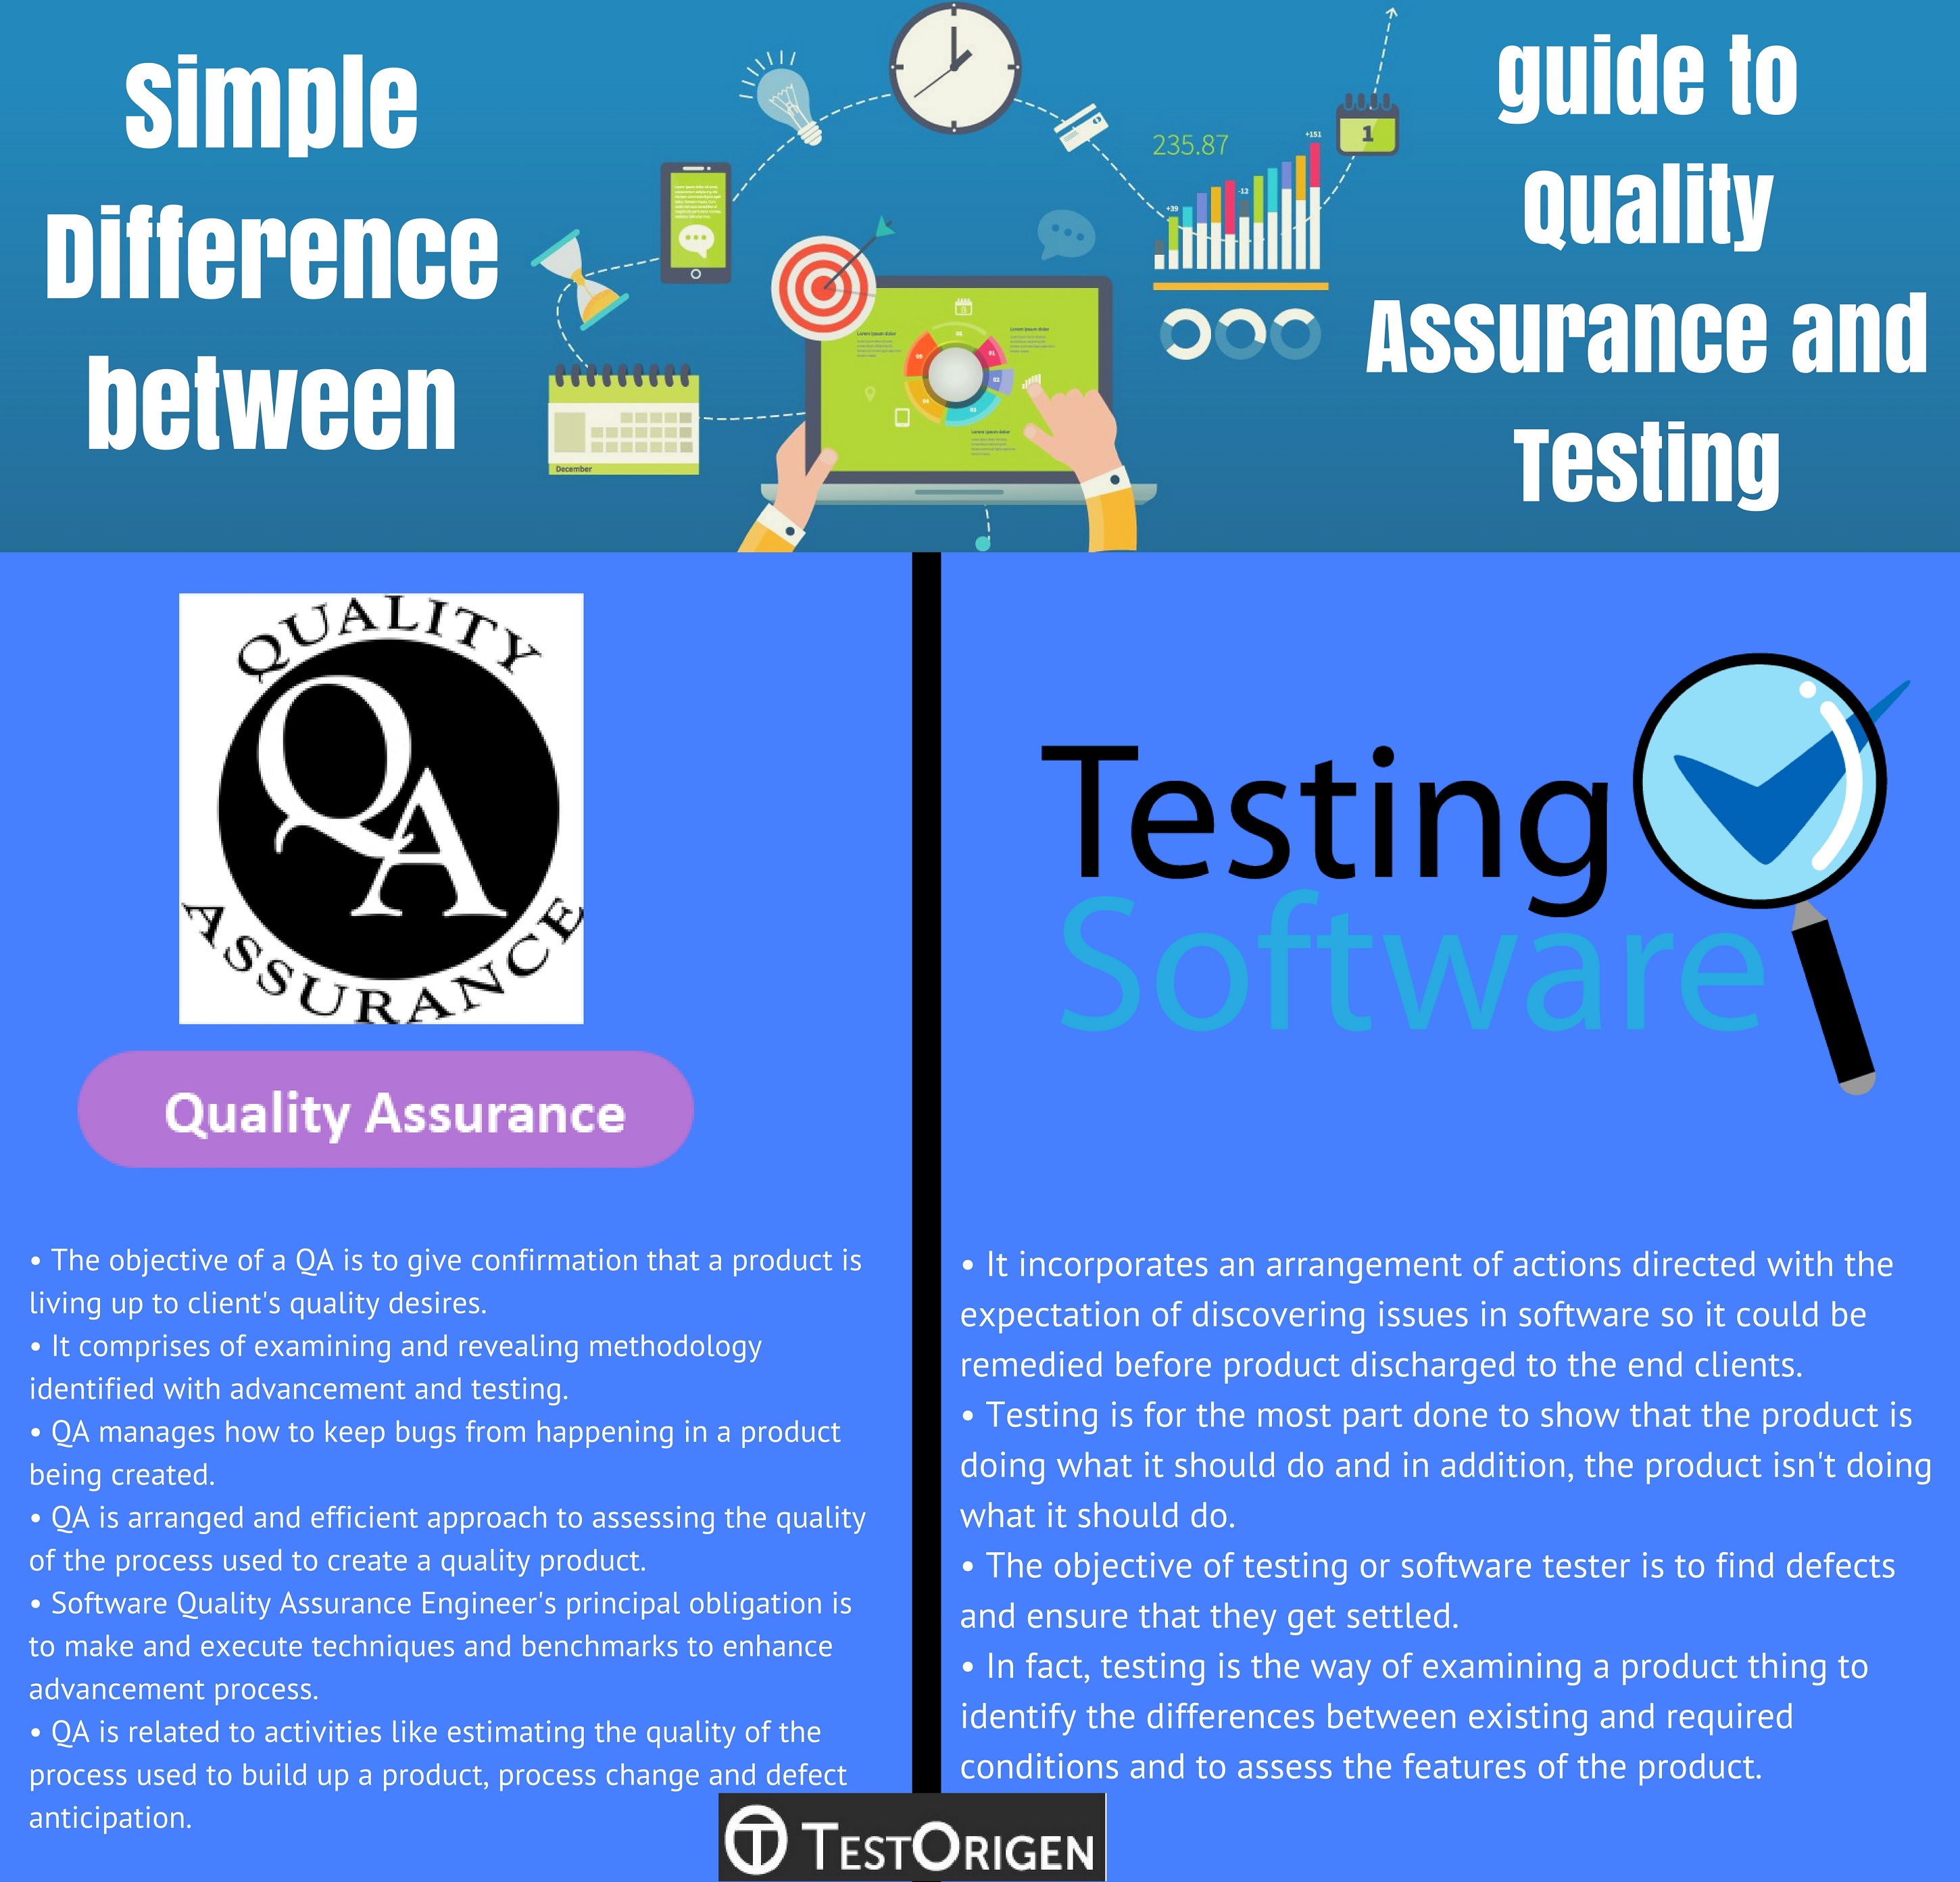 Simple Difference between guide to Quality Assurance and Testing